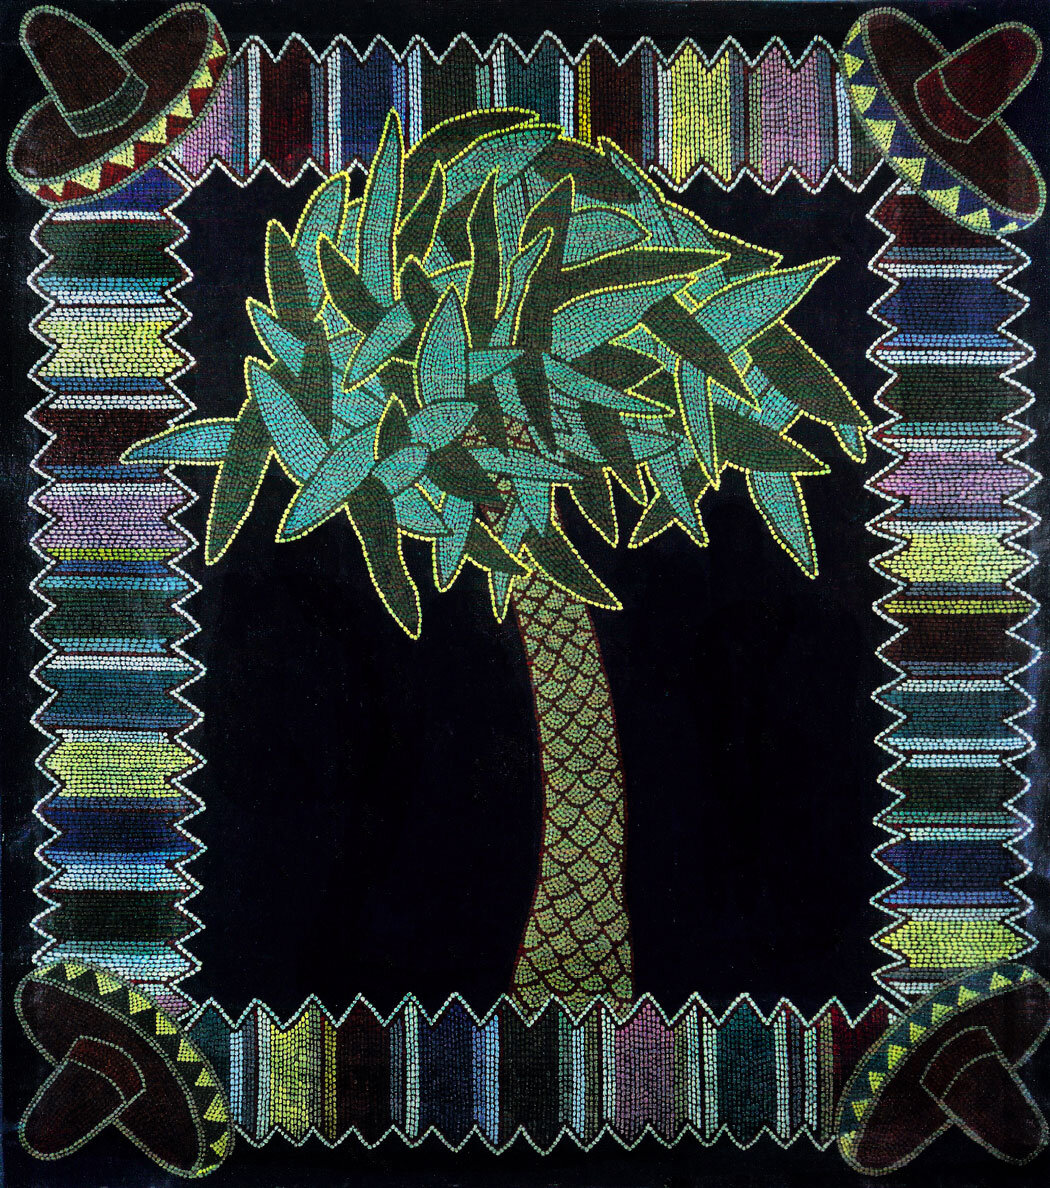   Cactus Palm , 1972, acrylic on rubberized canvas, 74 x 66 inches.  Whitney Biennial 1973  